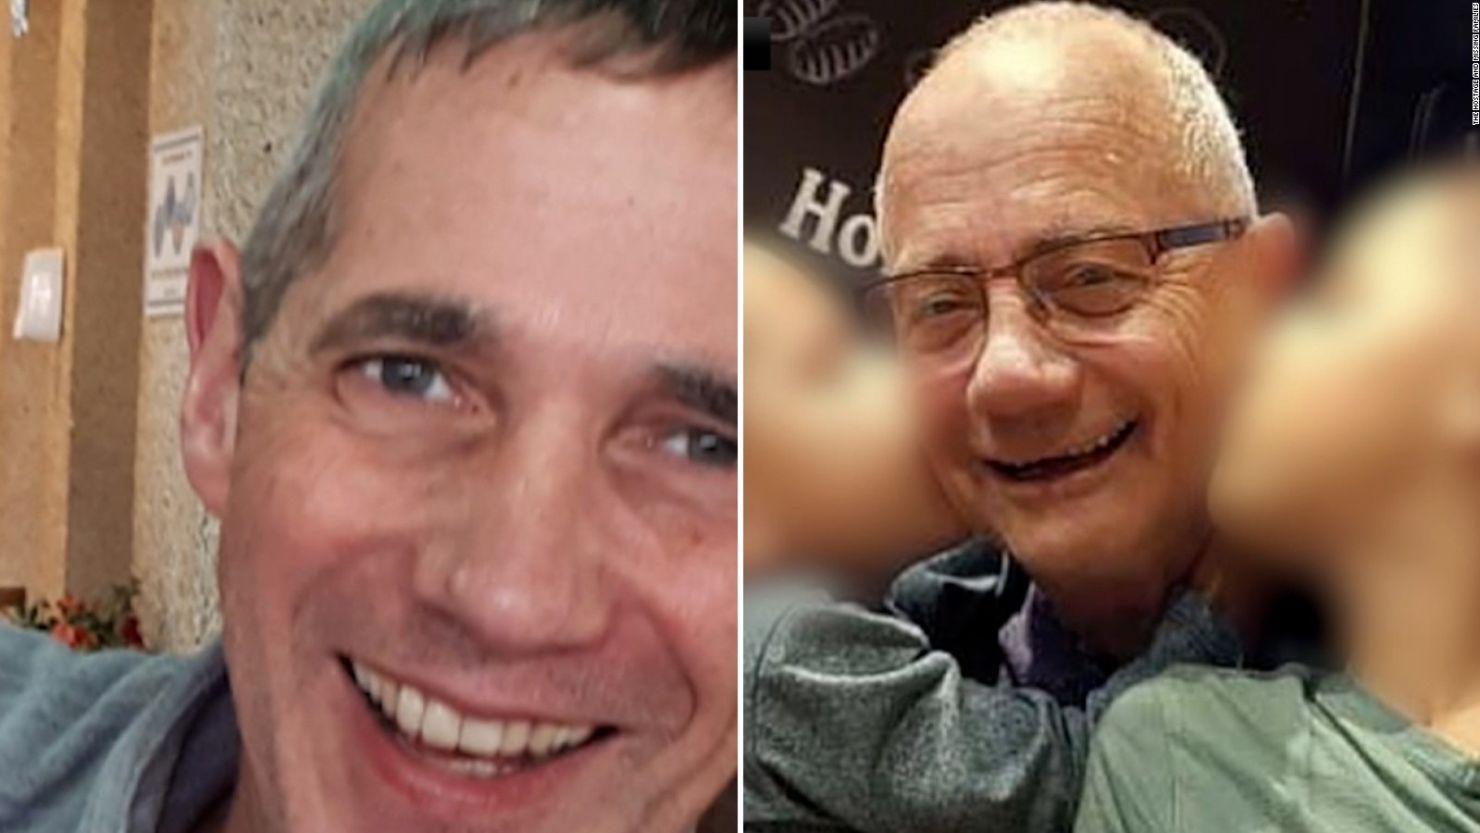 Fernando Simon Marman, 60, and Louis Har, 70, the two hostages rescued from Gaza by Israeli forces.